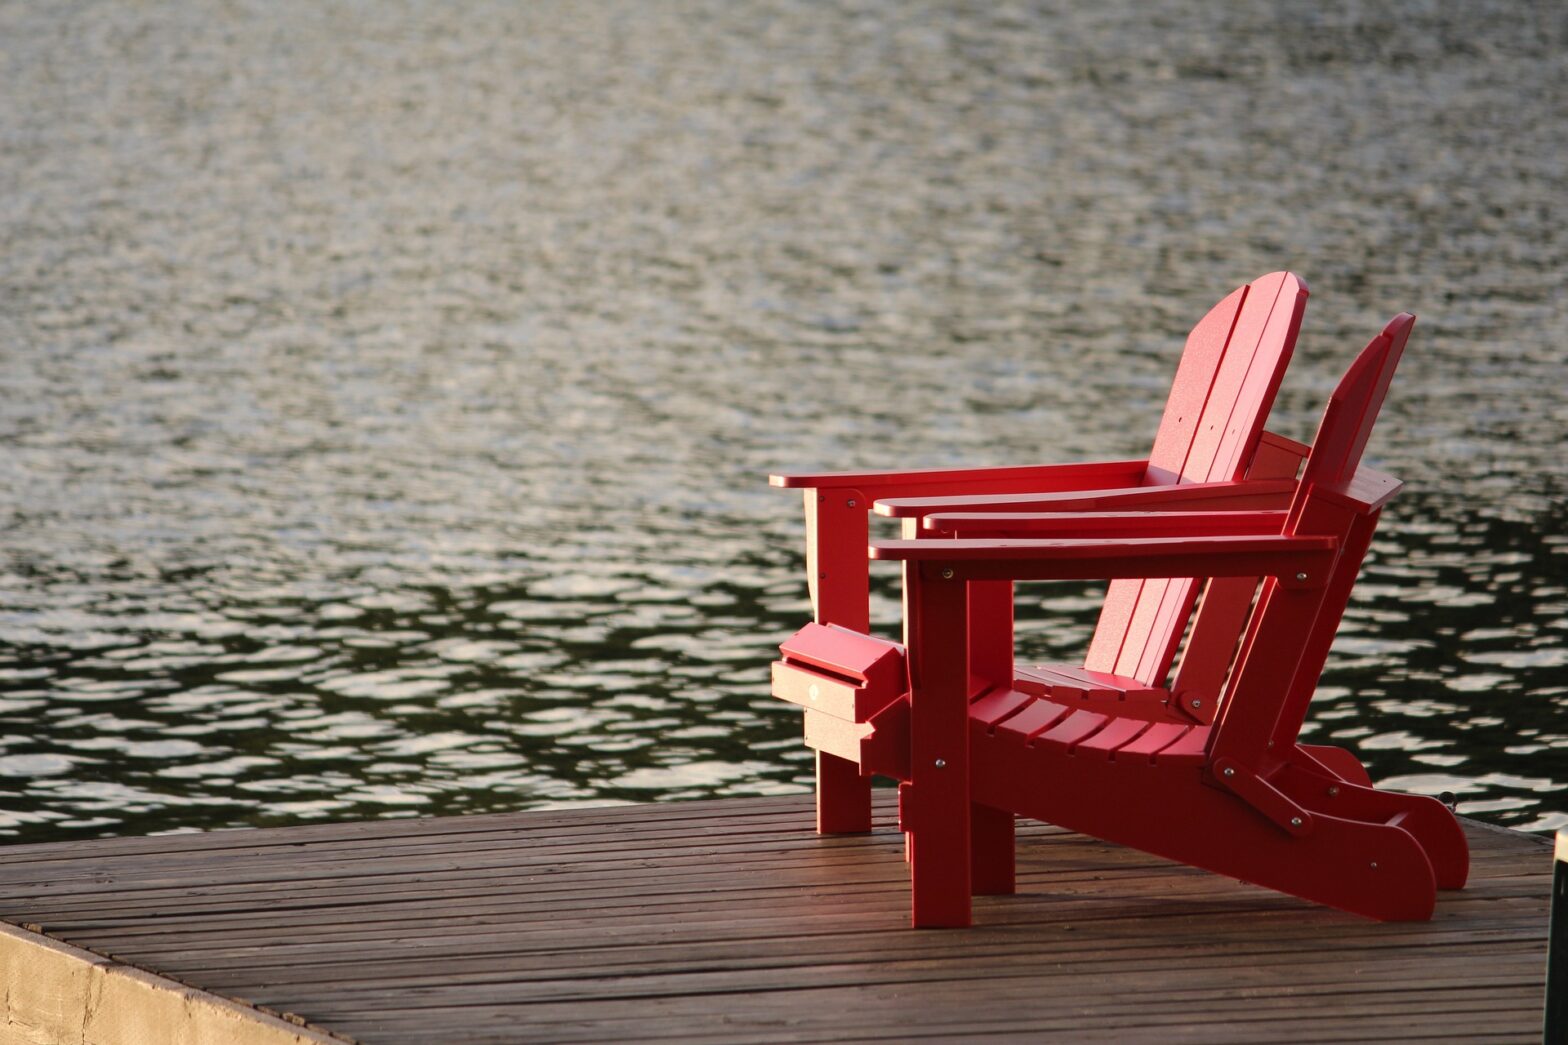 Chairs by a lake.